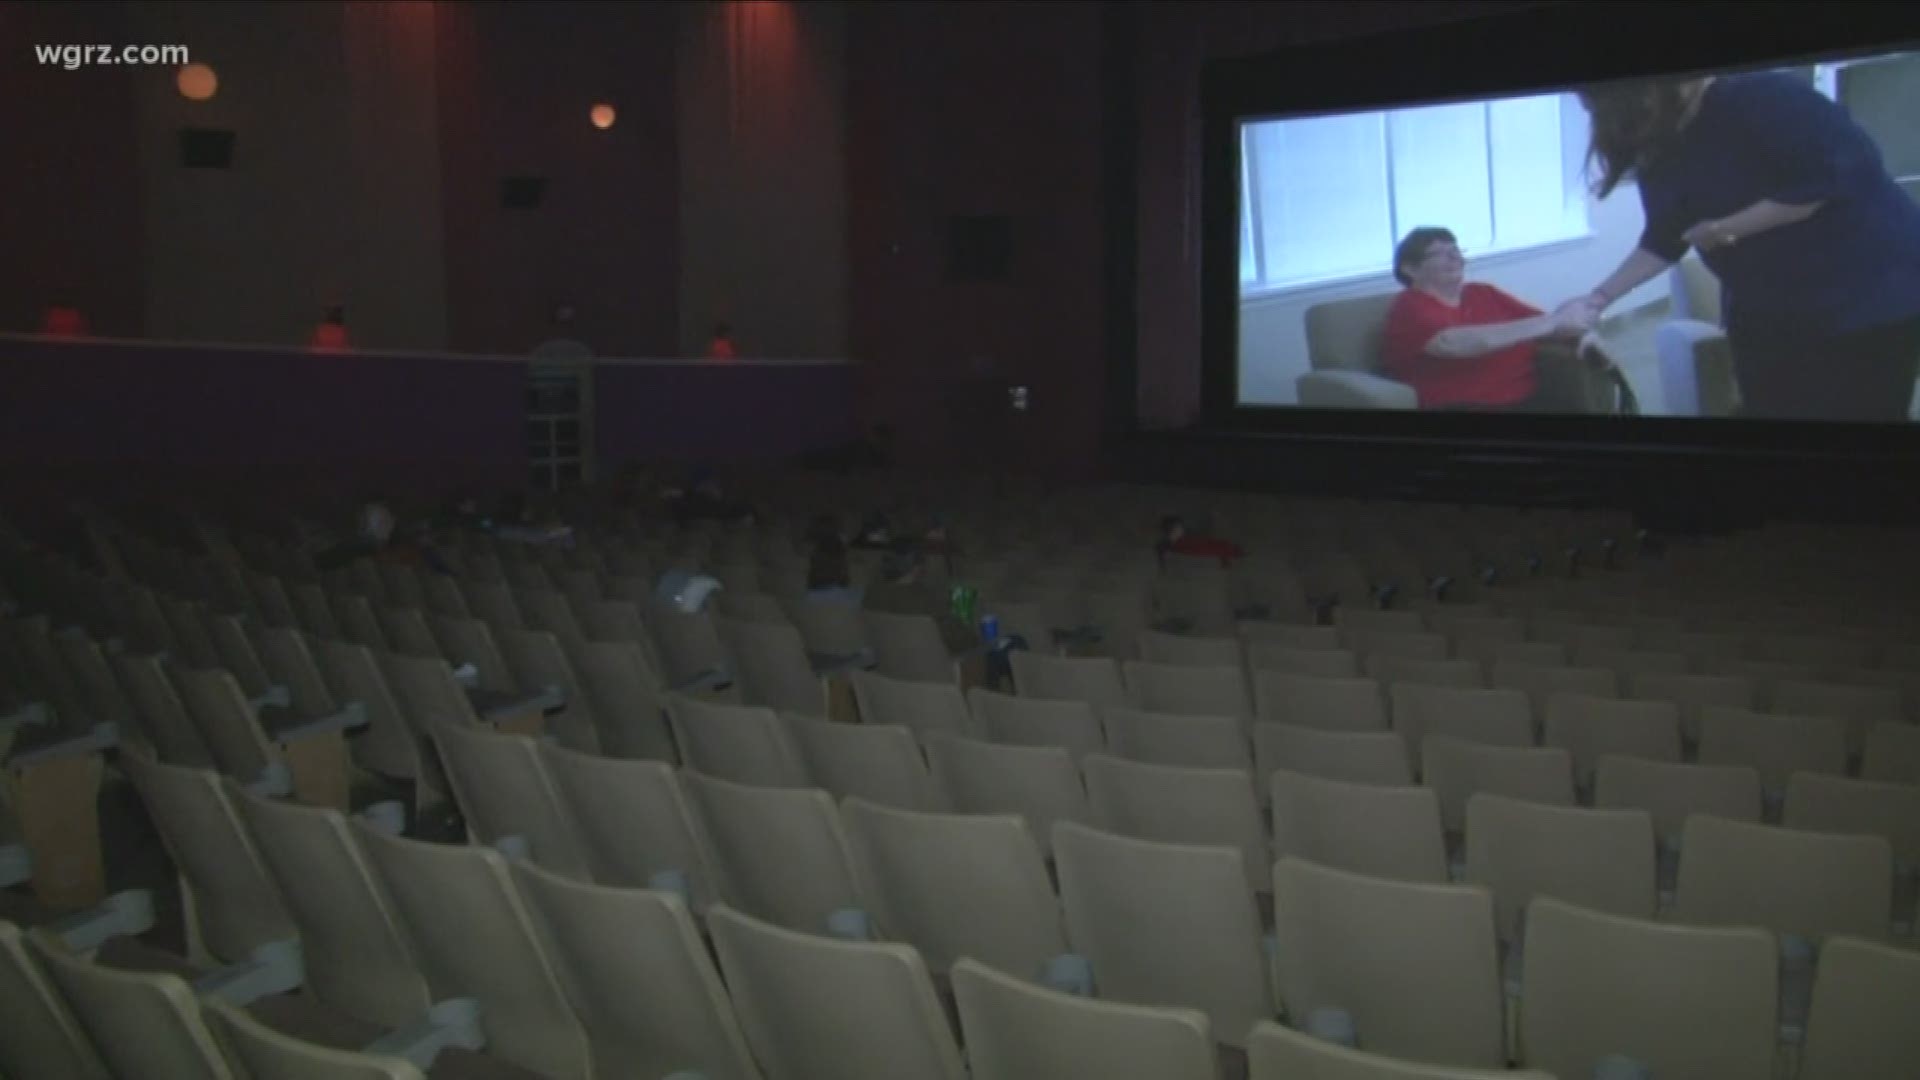 The state senate has been trying for years to pass a law that would let movie theaters sell alcohol. 
Now change could be coming in 2020.